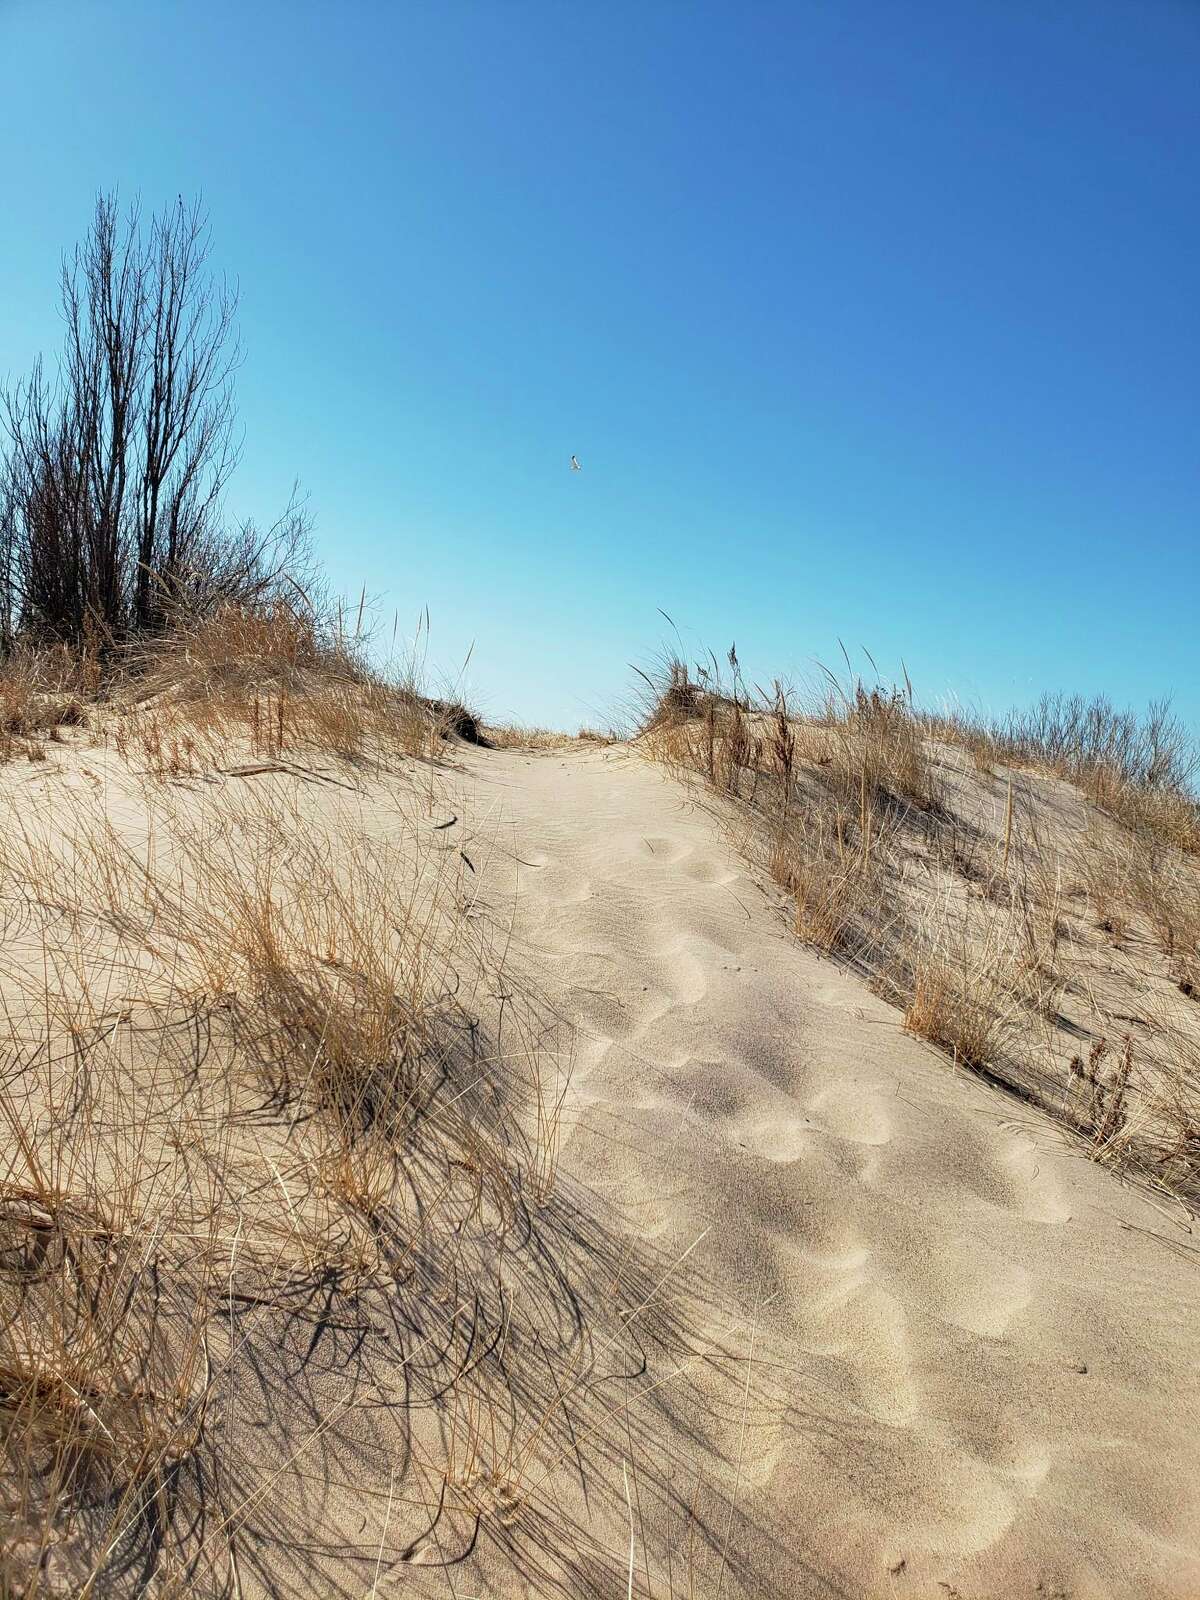 The Manistee Parks Commission is holding an overgrowth cleanup event at 10 a.m. on Saturday at First Street Beach. (File photo)